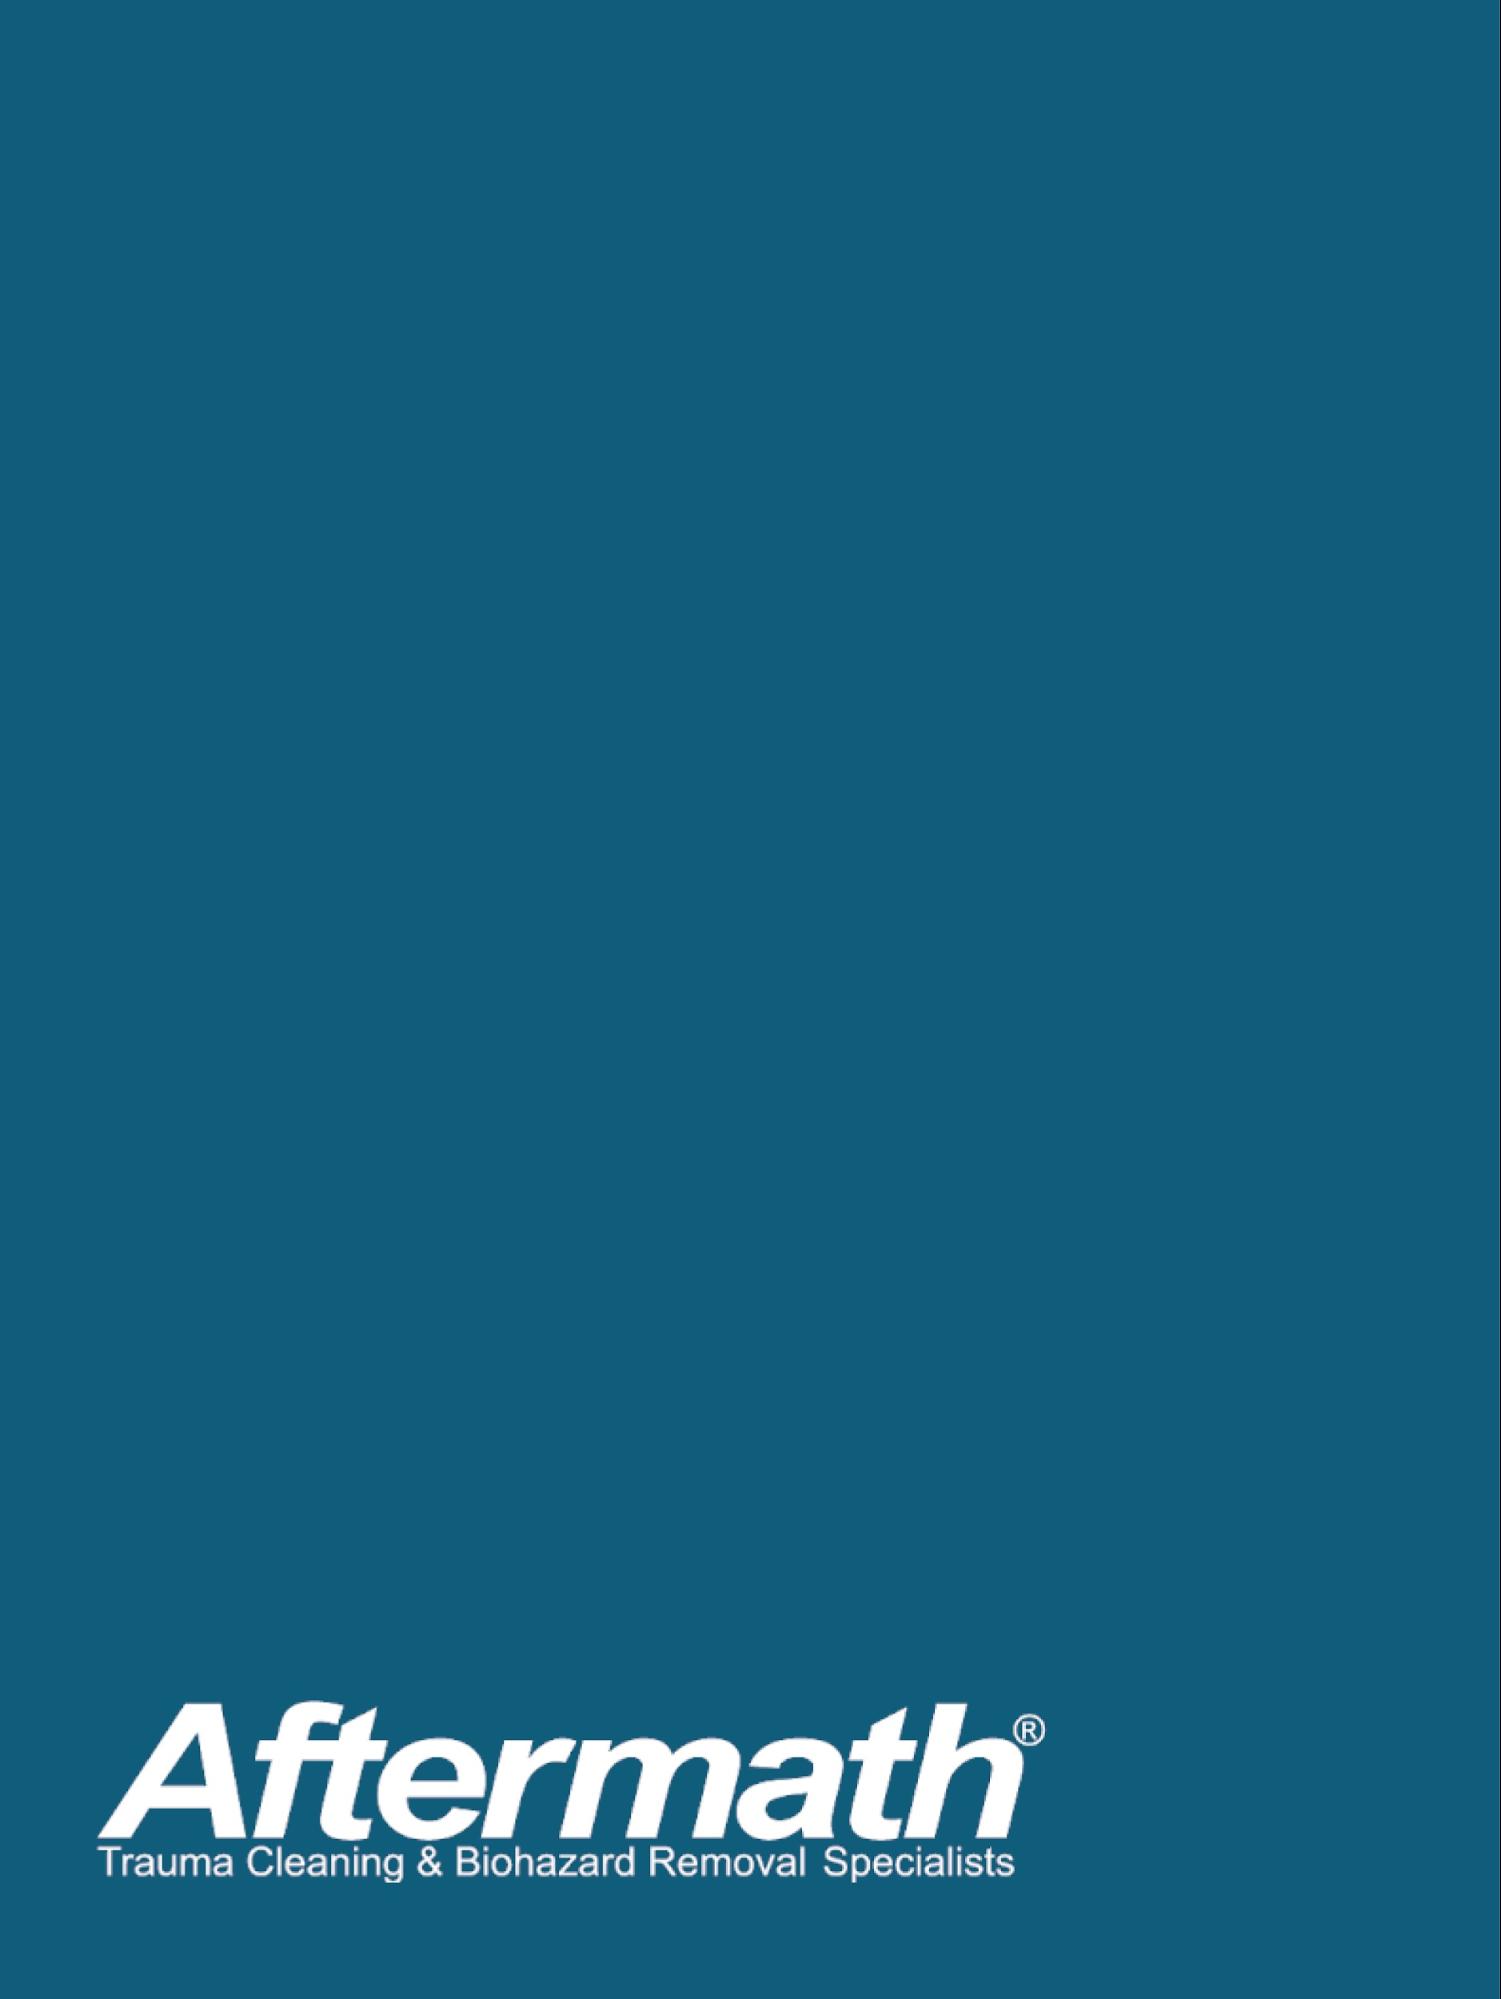 plain blue background with aftermath branding